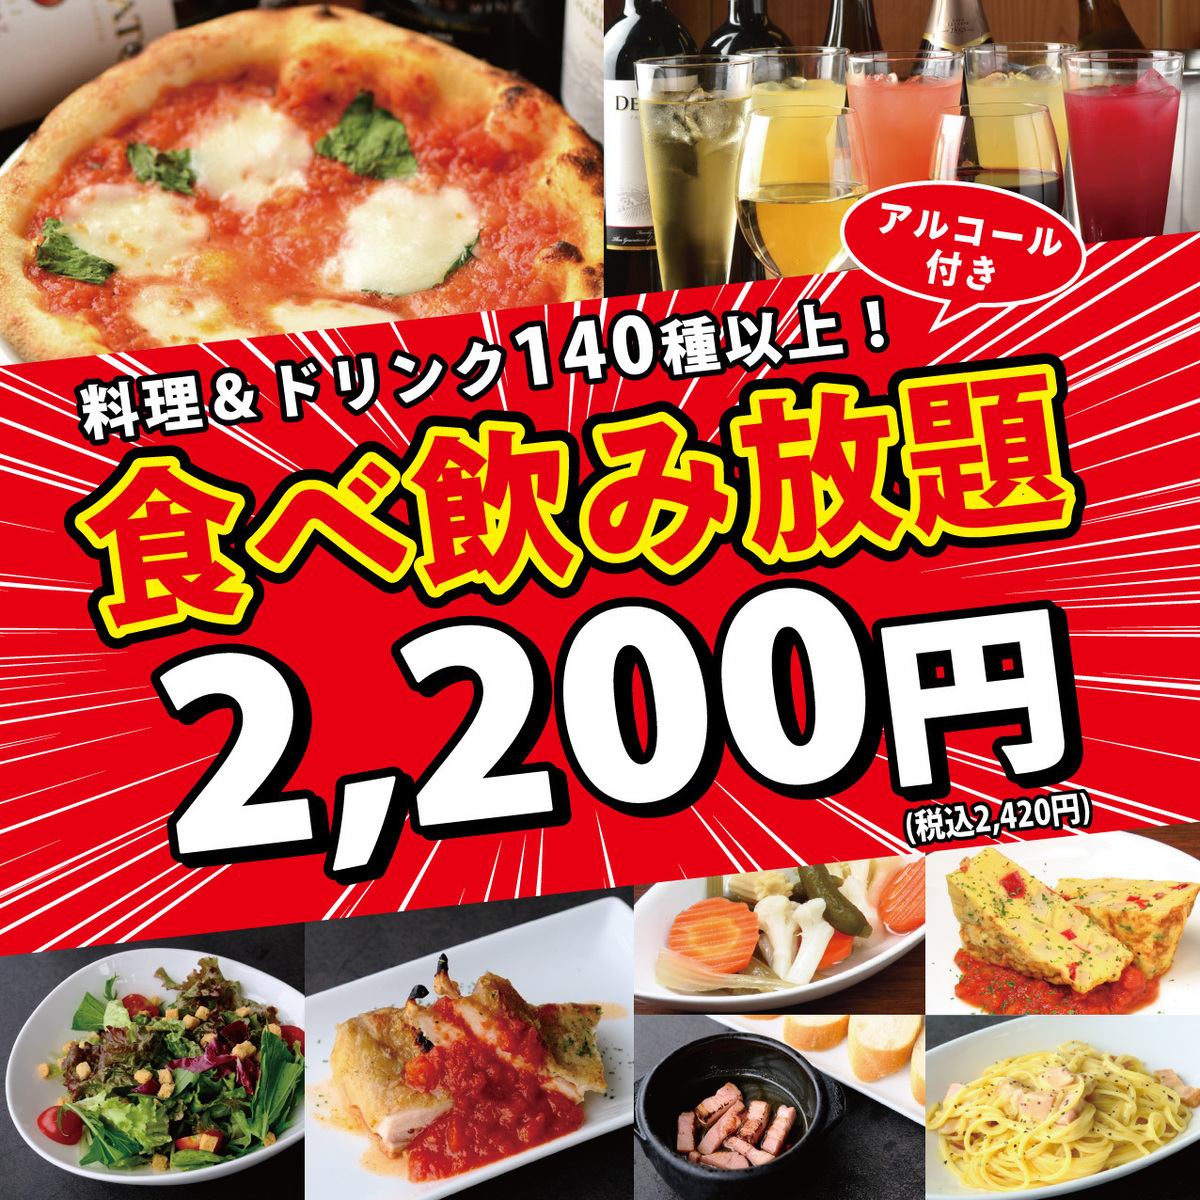 30 seconds walk from Exit 1 of Sakae Station! All-you-can-eat and drink for 2,420 yen♪